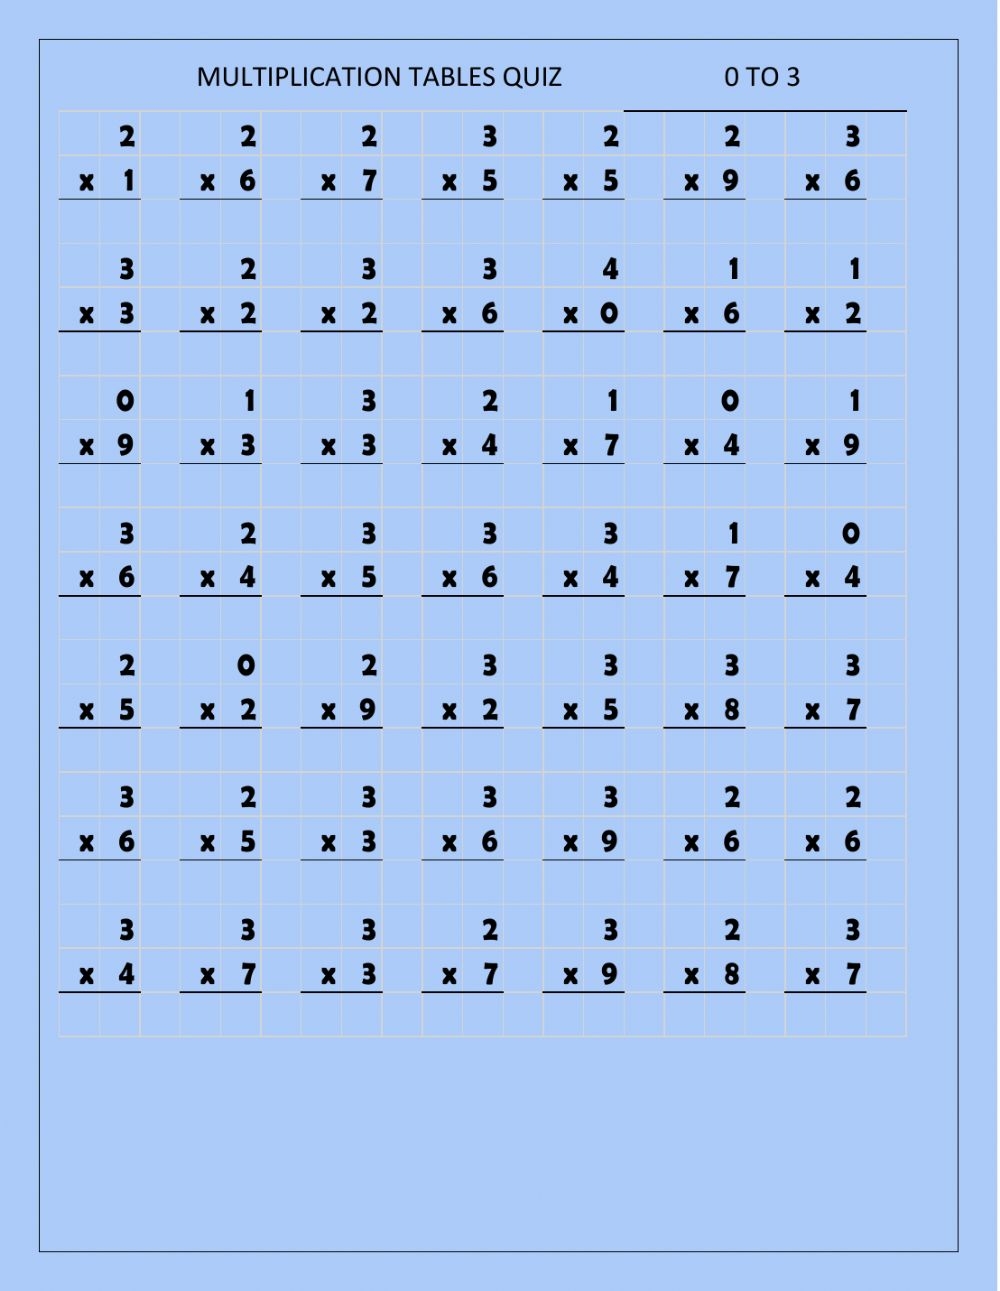 Multiplications Tables 0 To 3 Interactive Worksheet